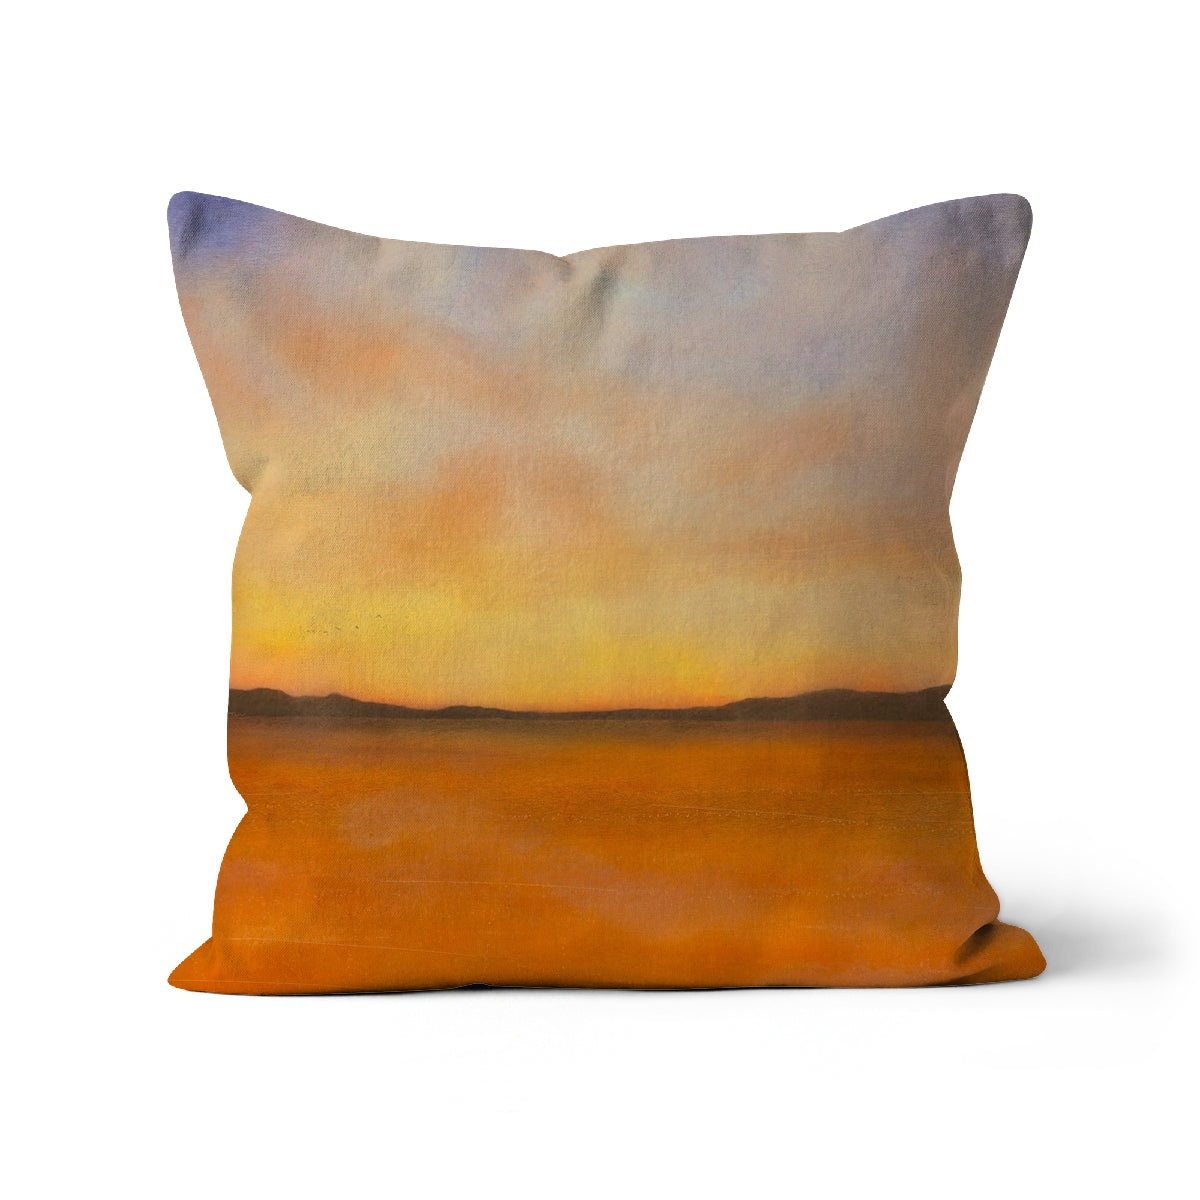 Islay Dawn Art Gifts Cushion-Cushions-Hebridean Islands Art Gallery-Canvas-12"x12"-Paintings, Prints, Homeware, Art Gifts From Scotland By Scottish Artist Kevin Hunter